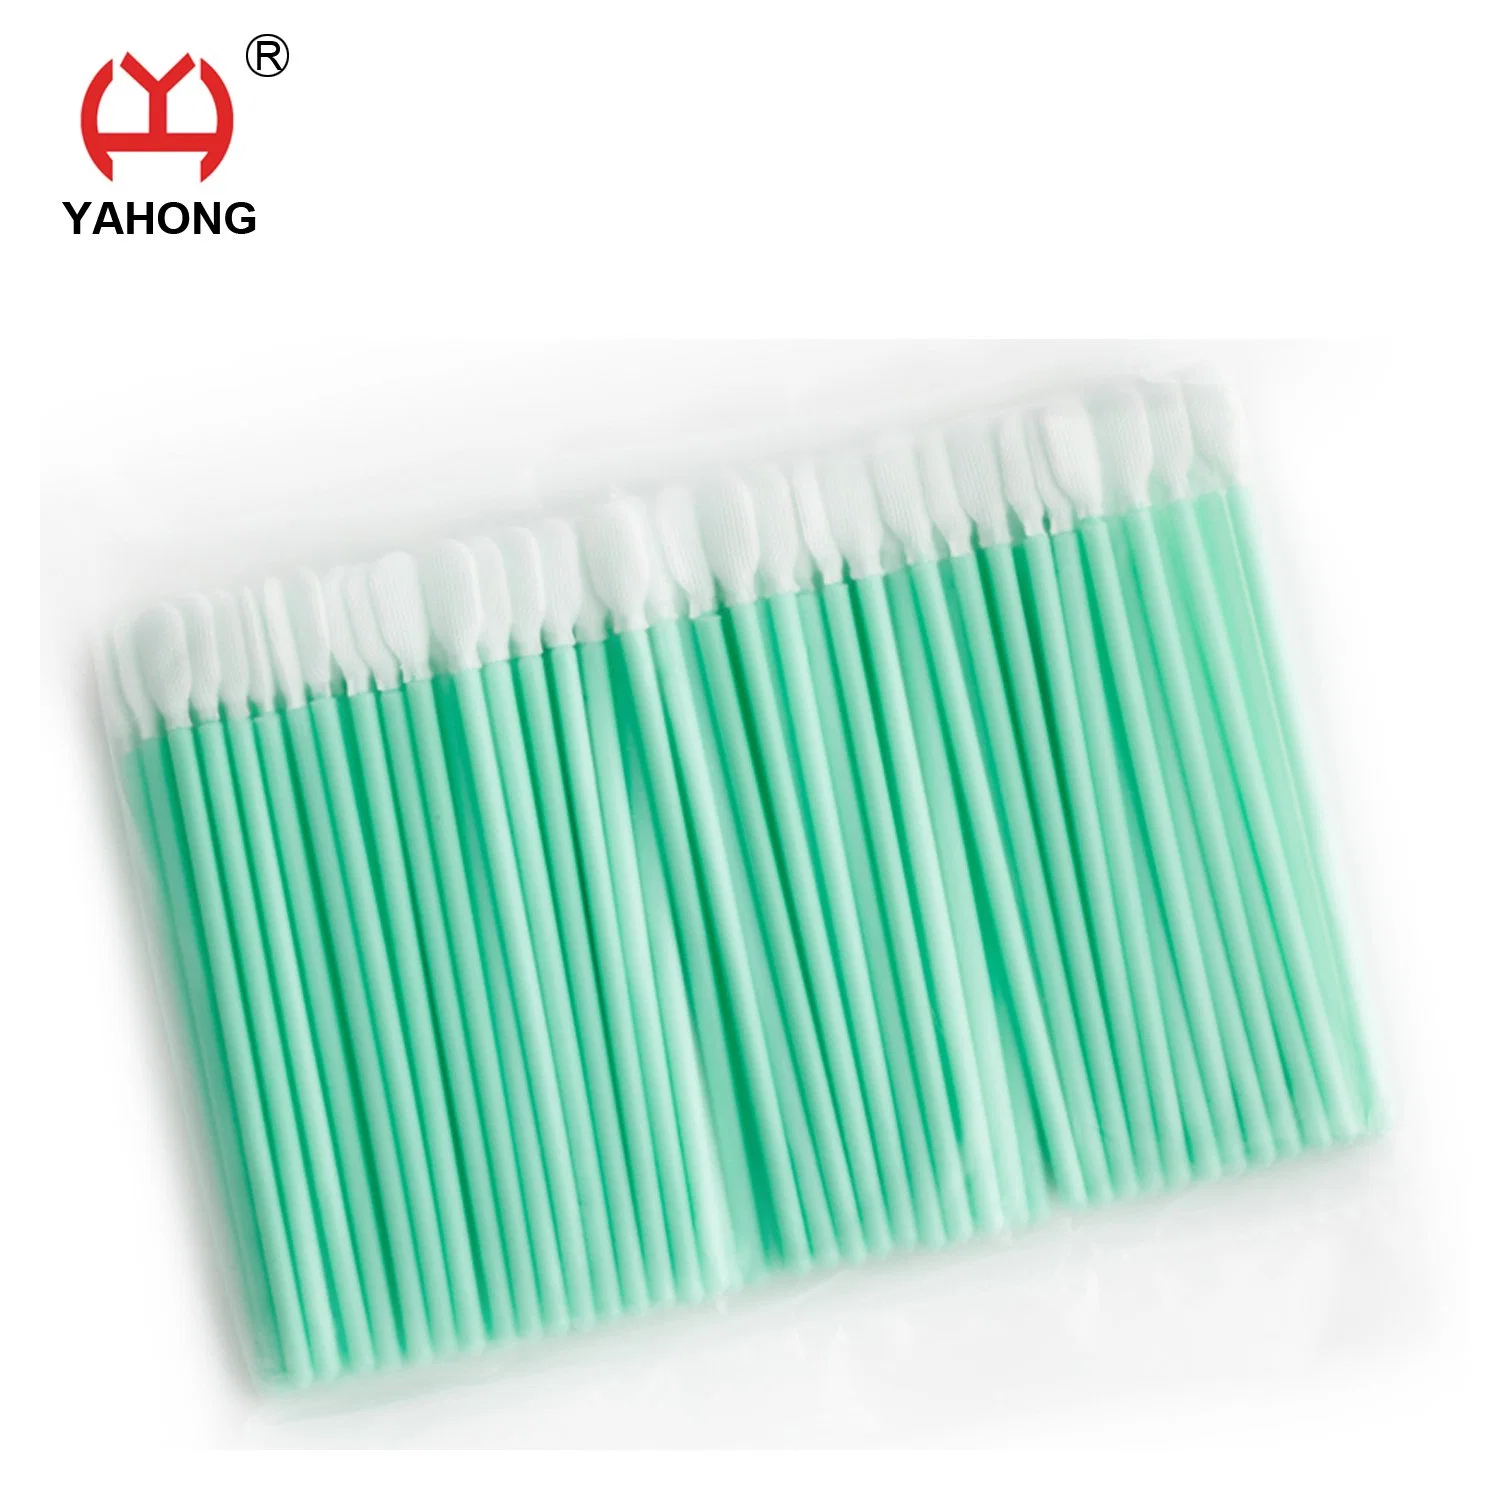 100PCS/Lot Nonwoven Cotton Swab Dust-Proof for Clean Focus Lens and Protective Windows